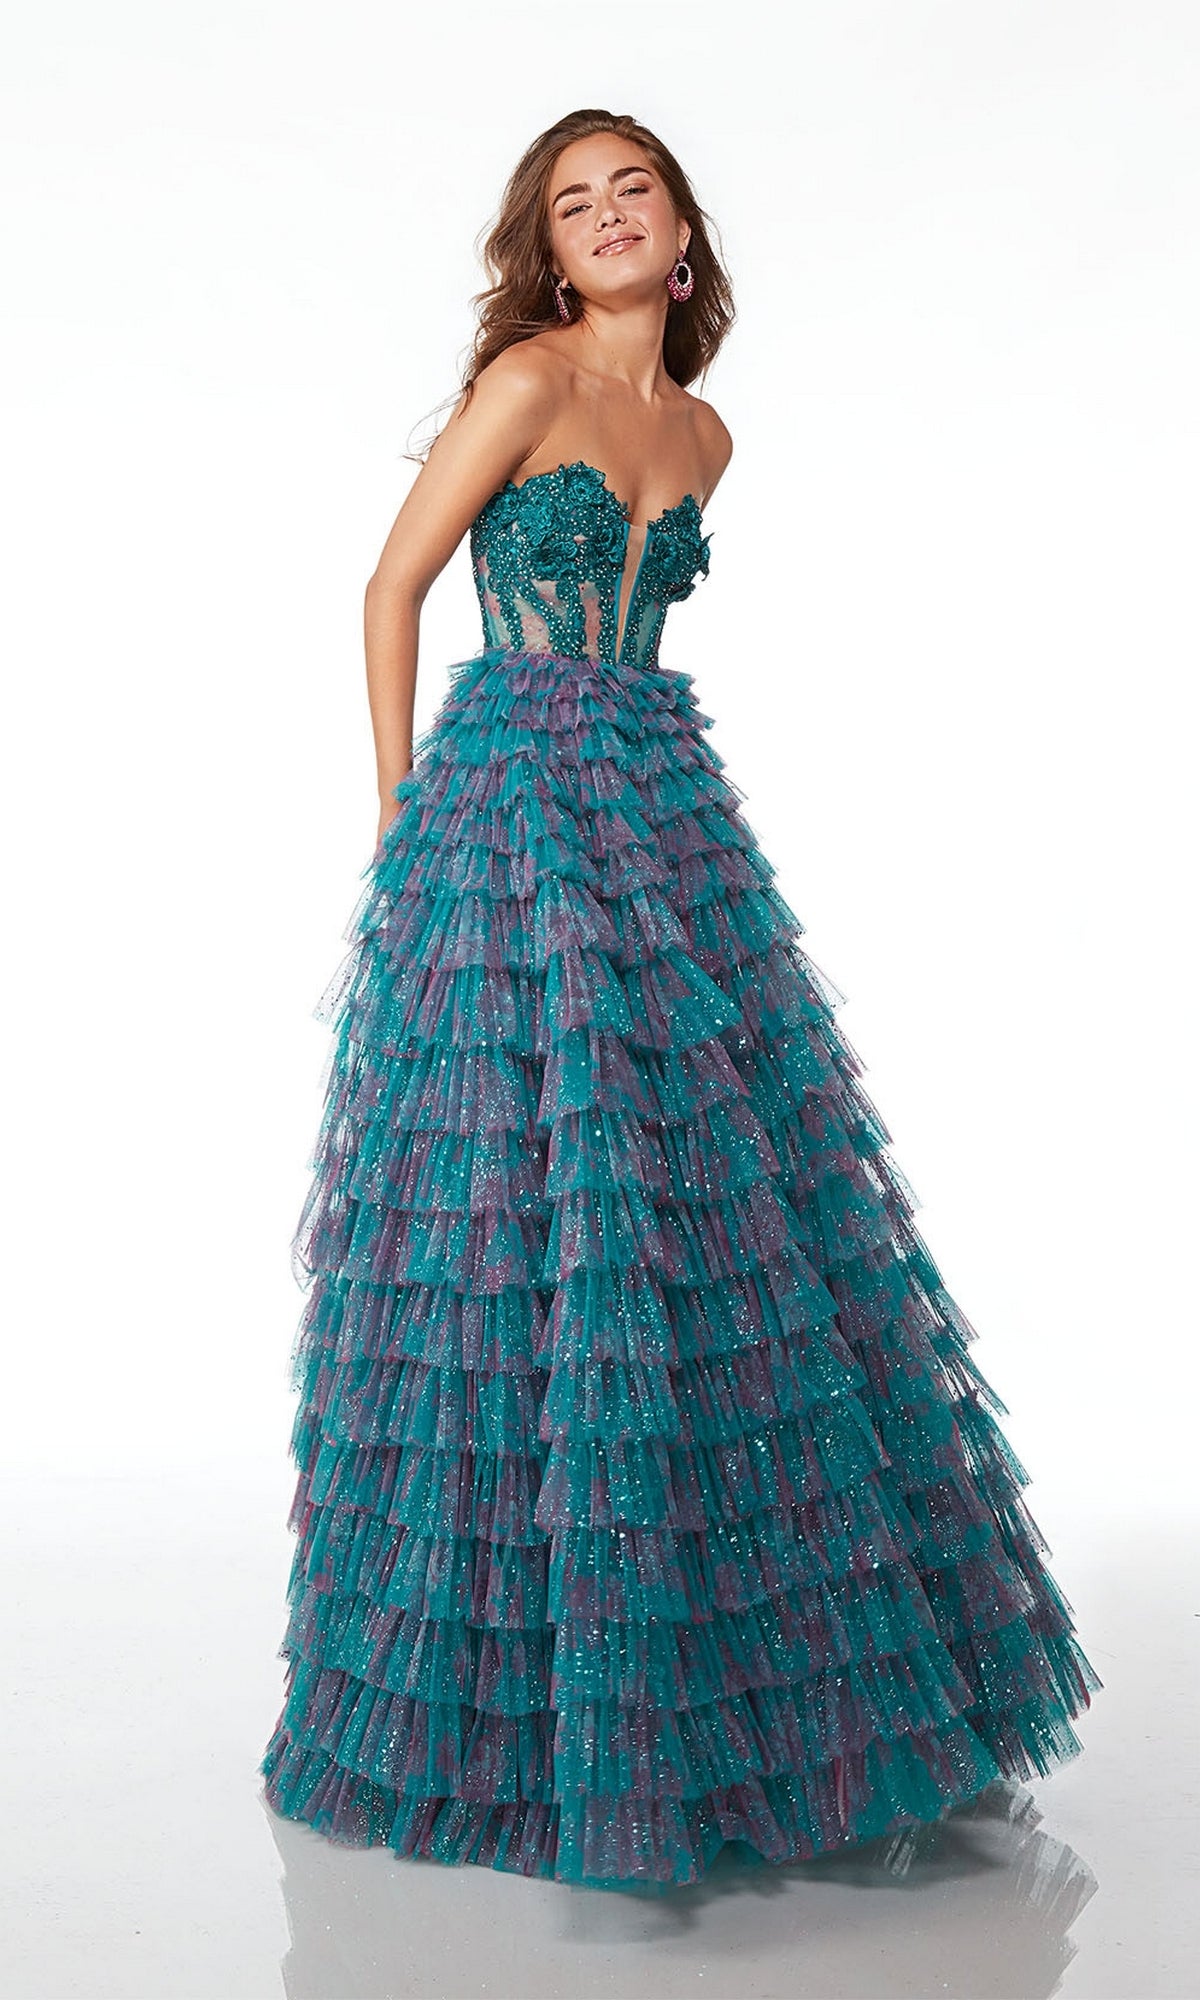 Alyce Strapless Ruffled Prom Ball Gown 61535